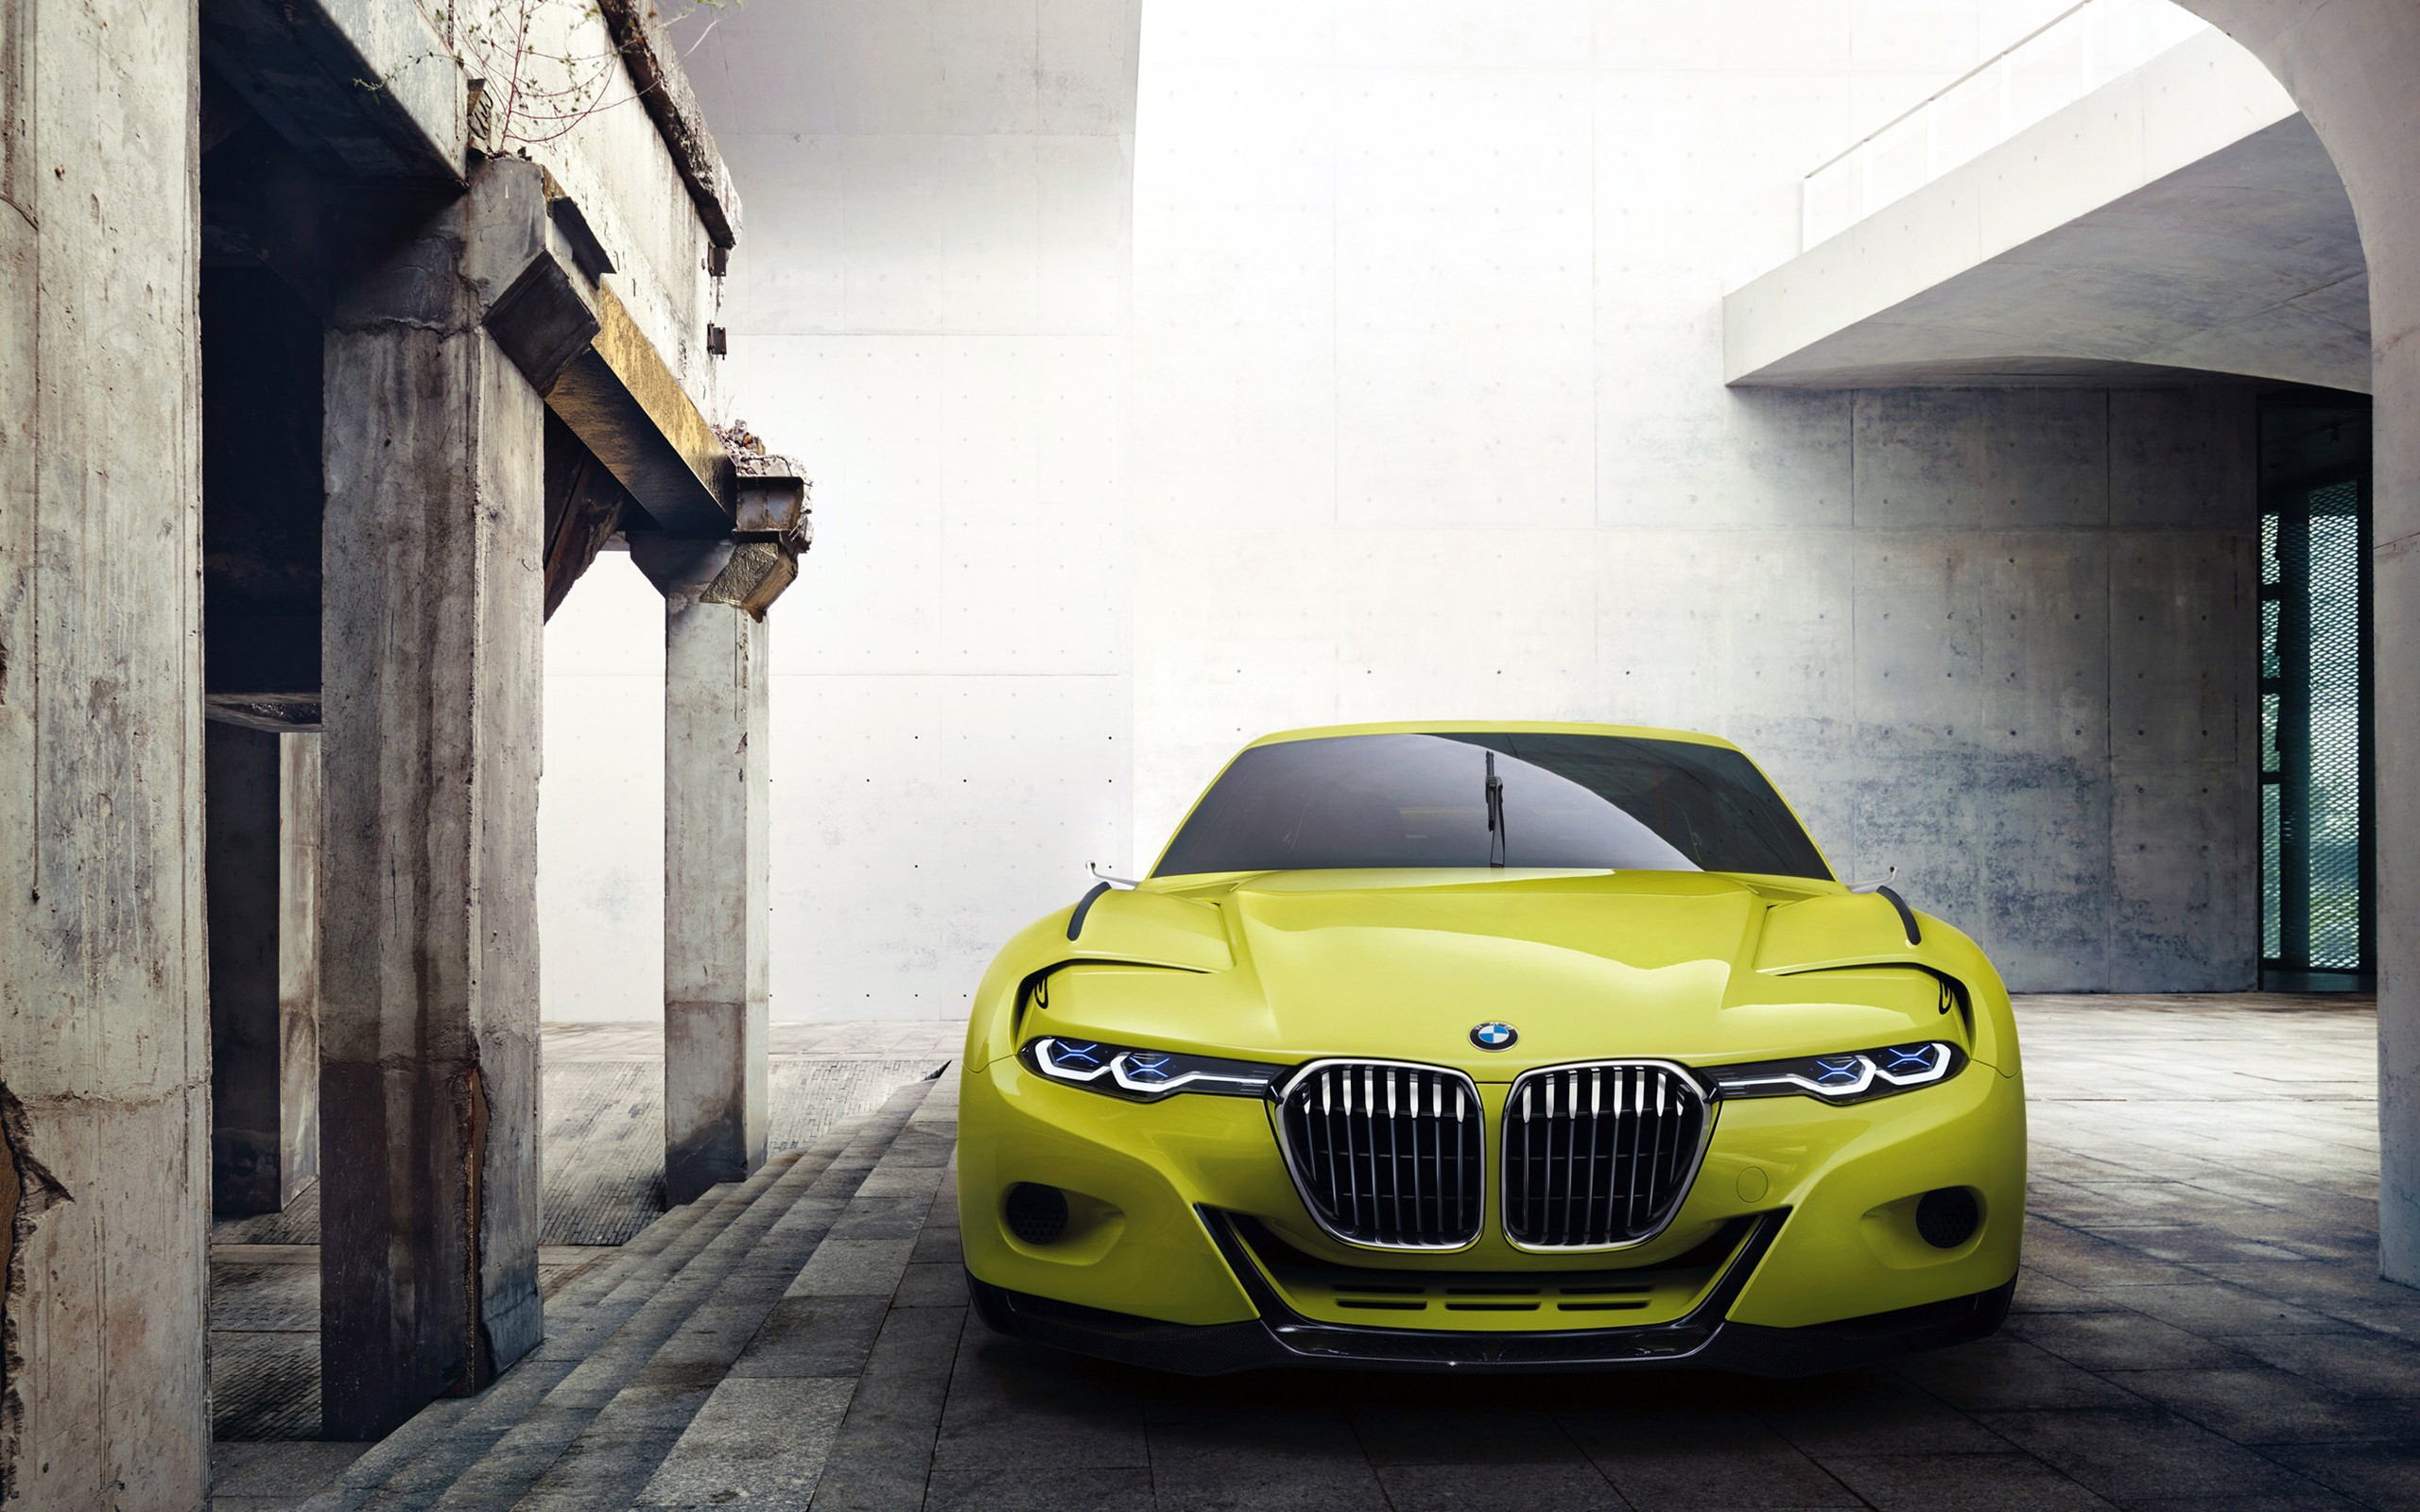 General 2560x1600 BMW car vehicle BMW 3.0 CSL HOMMAGE yellow cars 2015 (Year) German cars concept cars